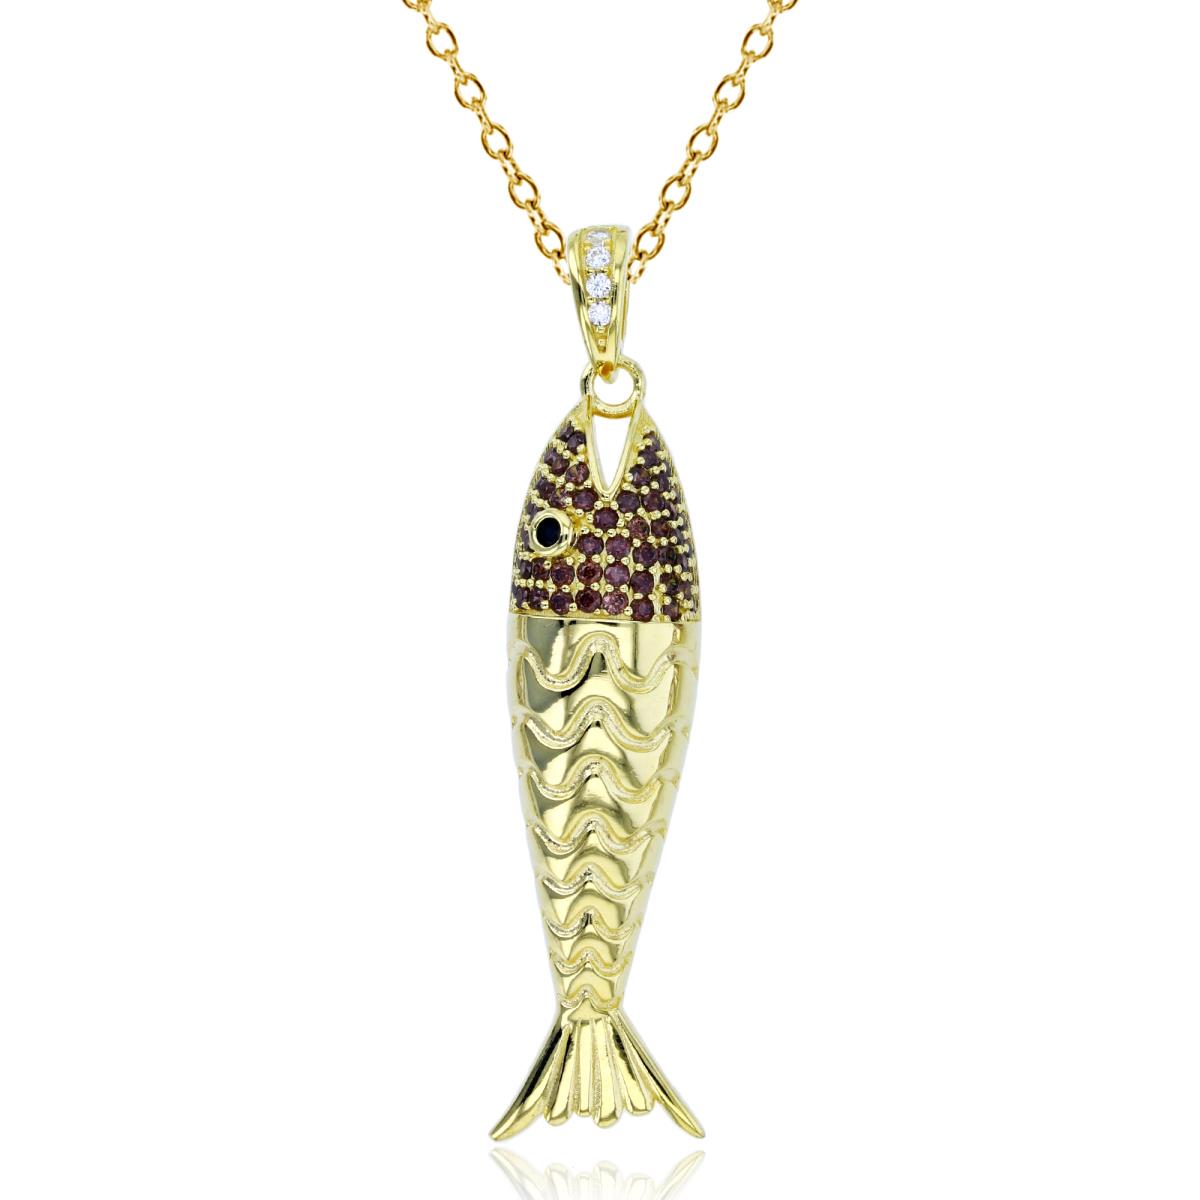 Sterling Silver+1Micron Yellow Gold Rnd Coffee/White/Black CZ Polished & Textured Fish 18"Necklace